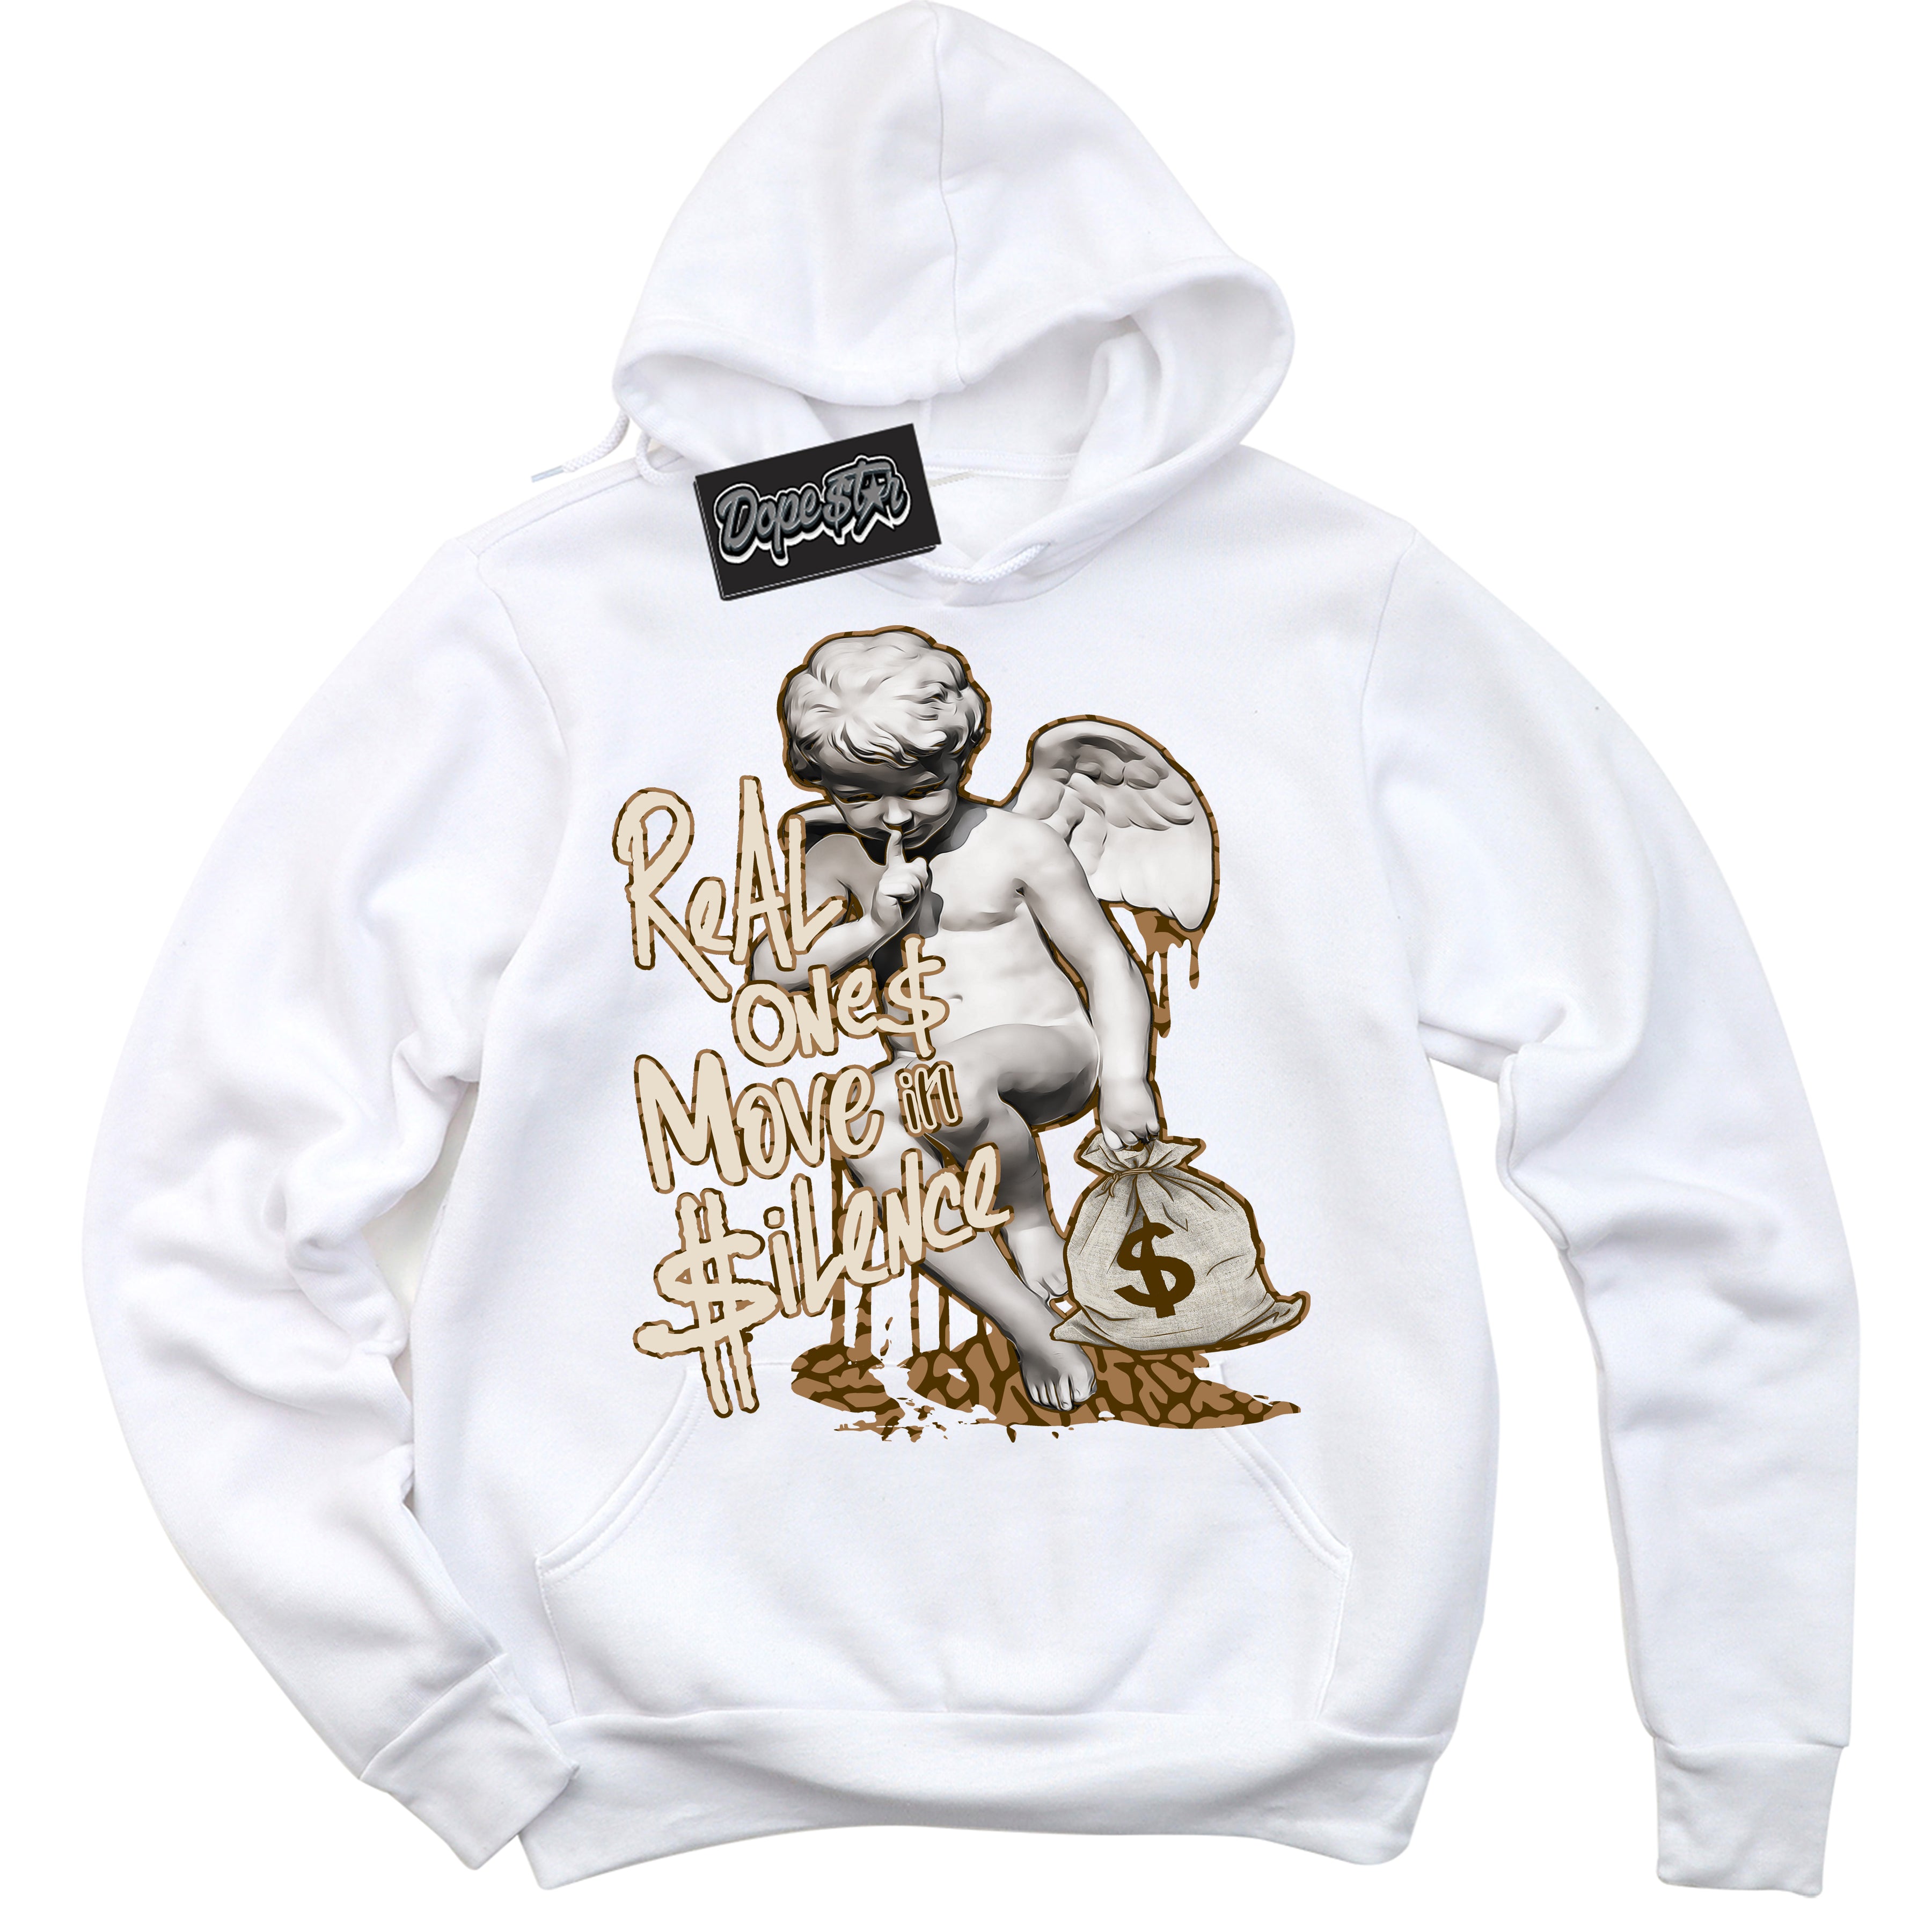 Cool White Graphic DopeStar Hoodie with “ Real Ones Cherub “ print, that perfectly matches Palomino 3s sneakers